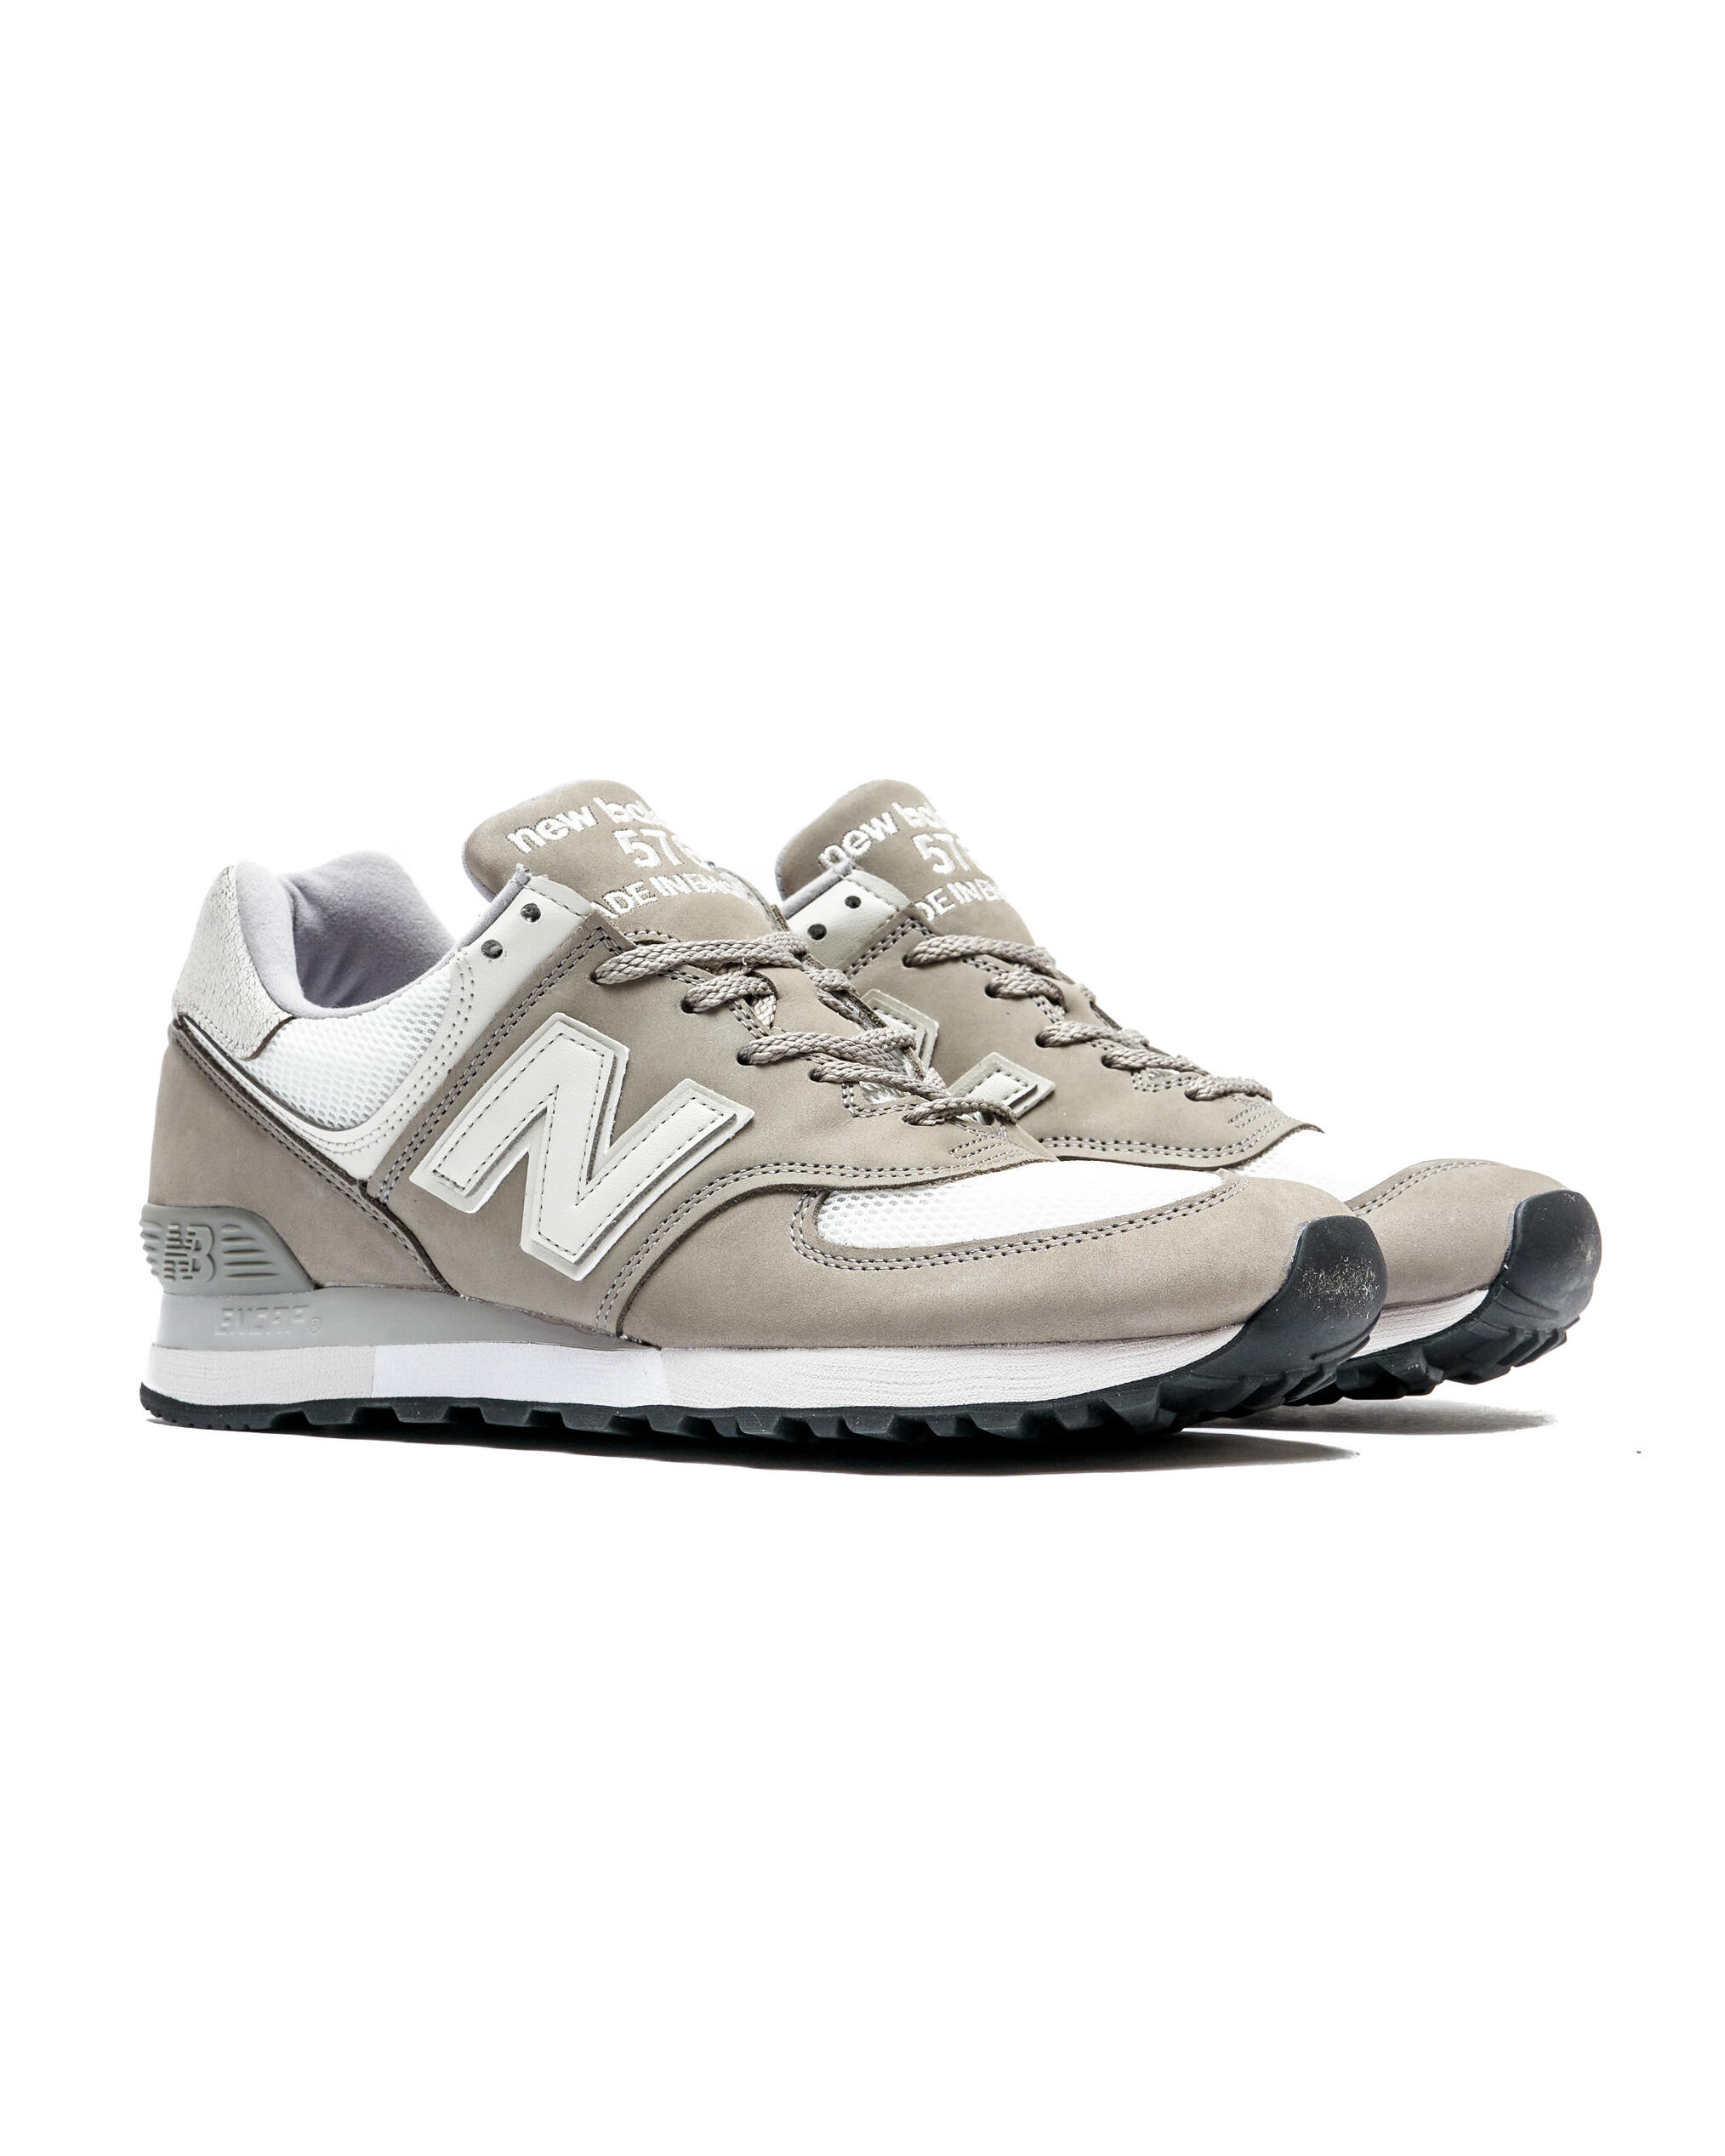 New Balance OU 576 FLB - Made in England